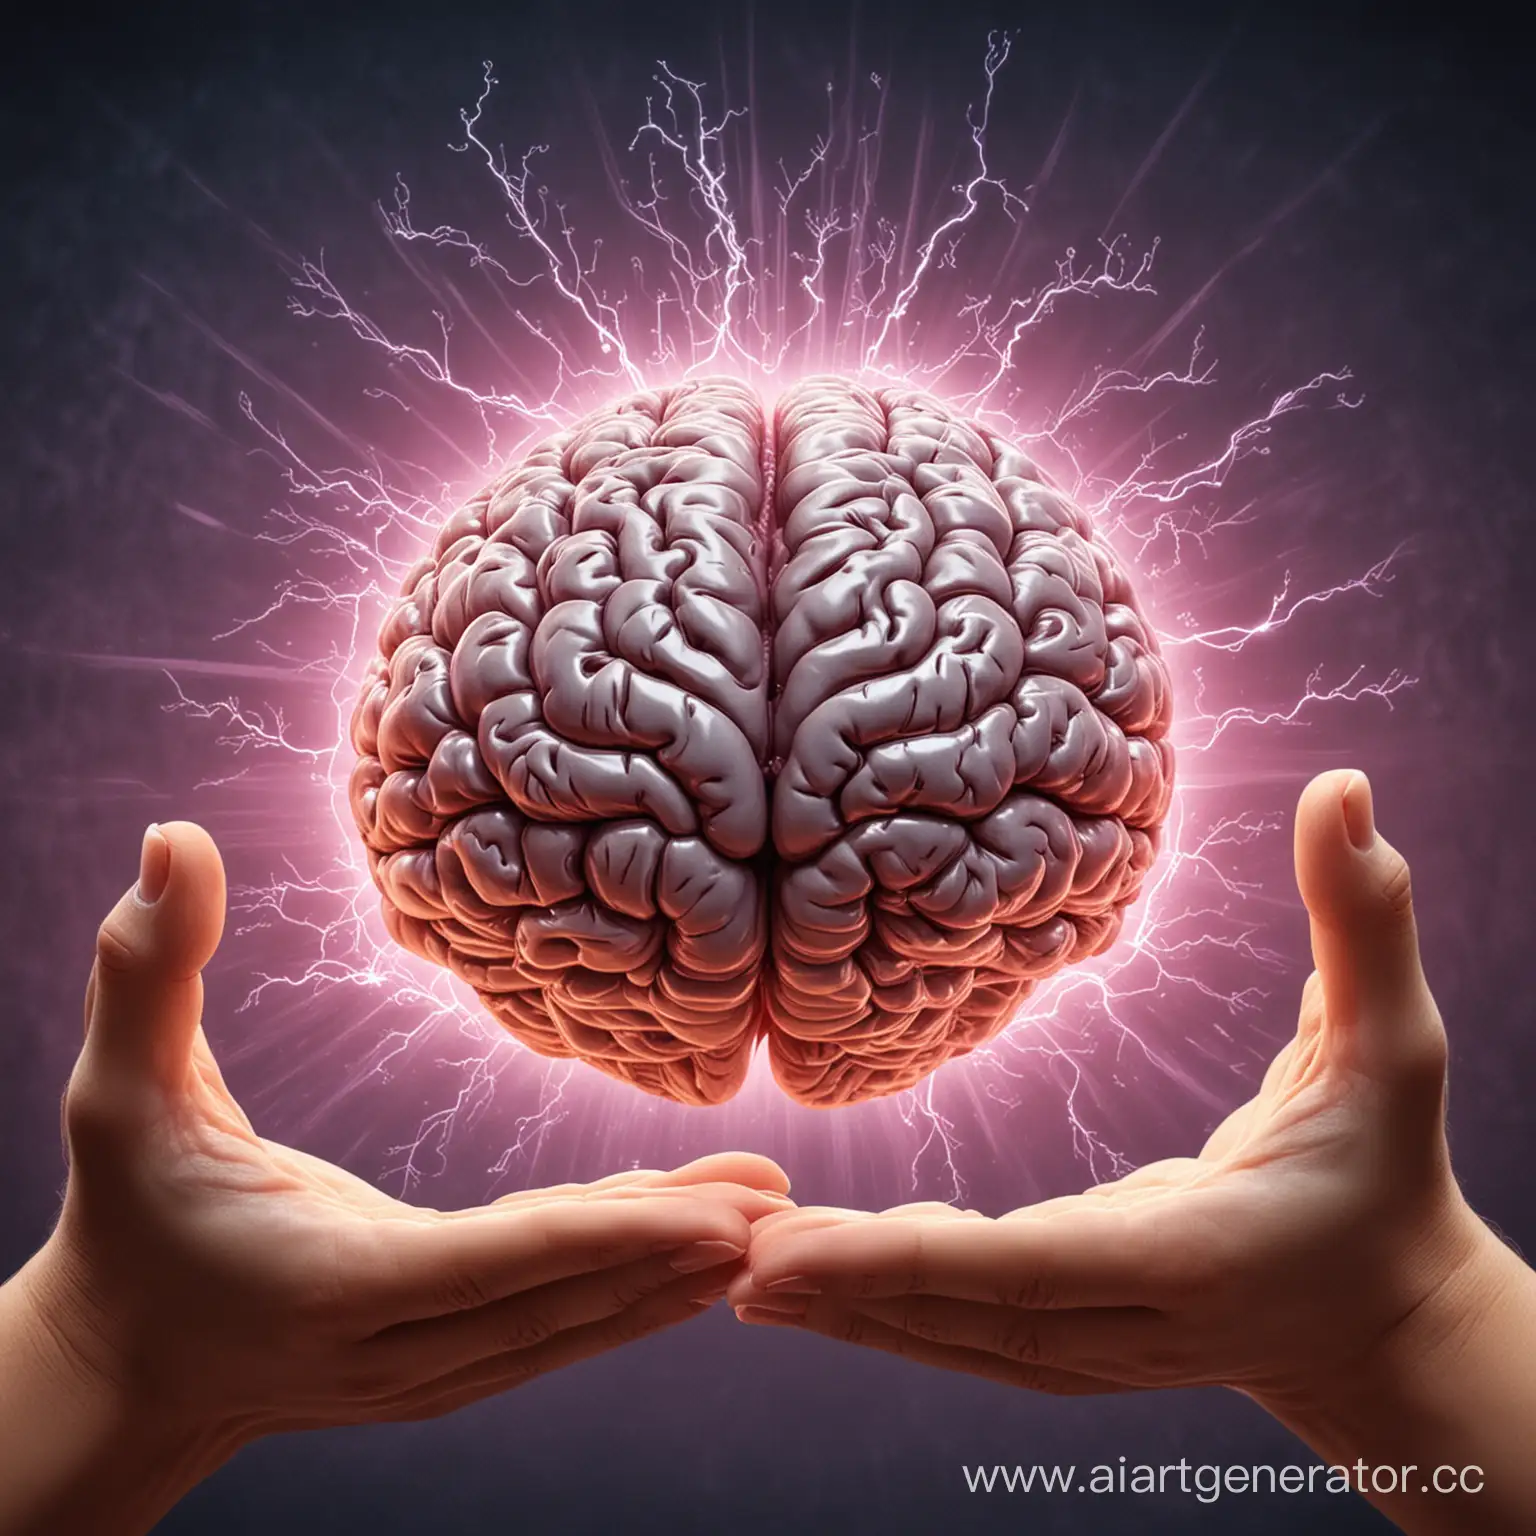 The magic brain in your hands